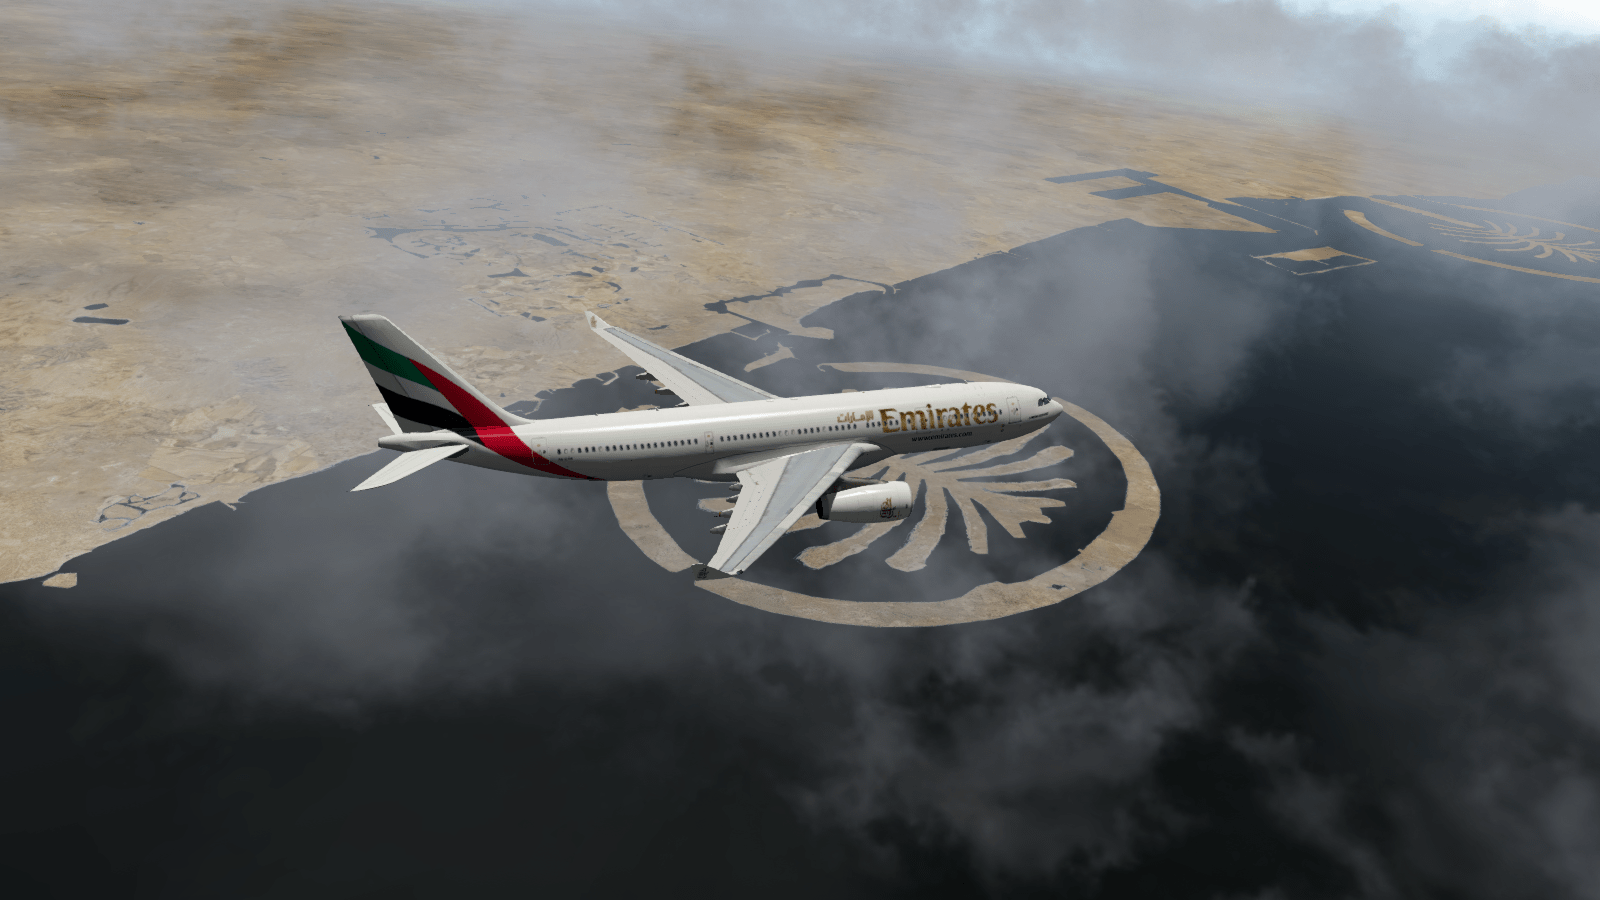 Emirates Wallpapers - Top Free Emirates Backgrounds ...